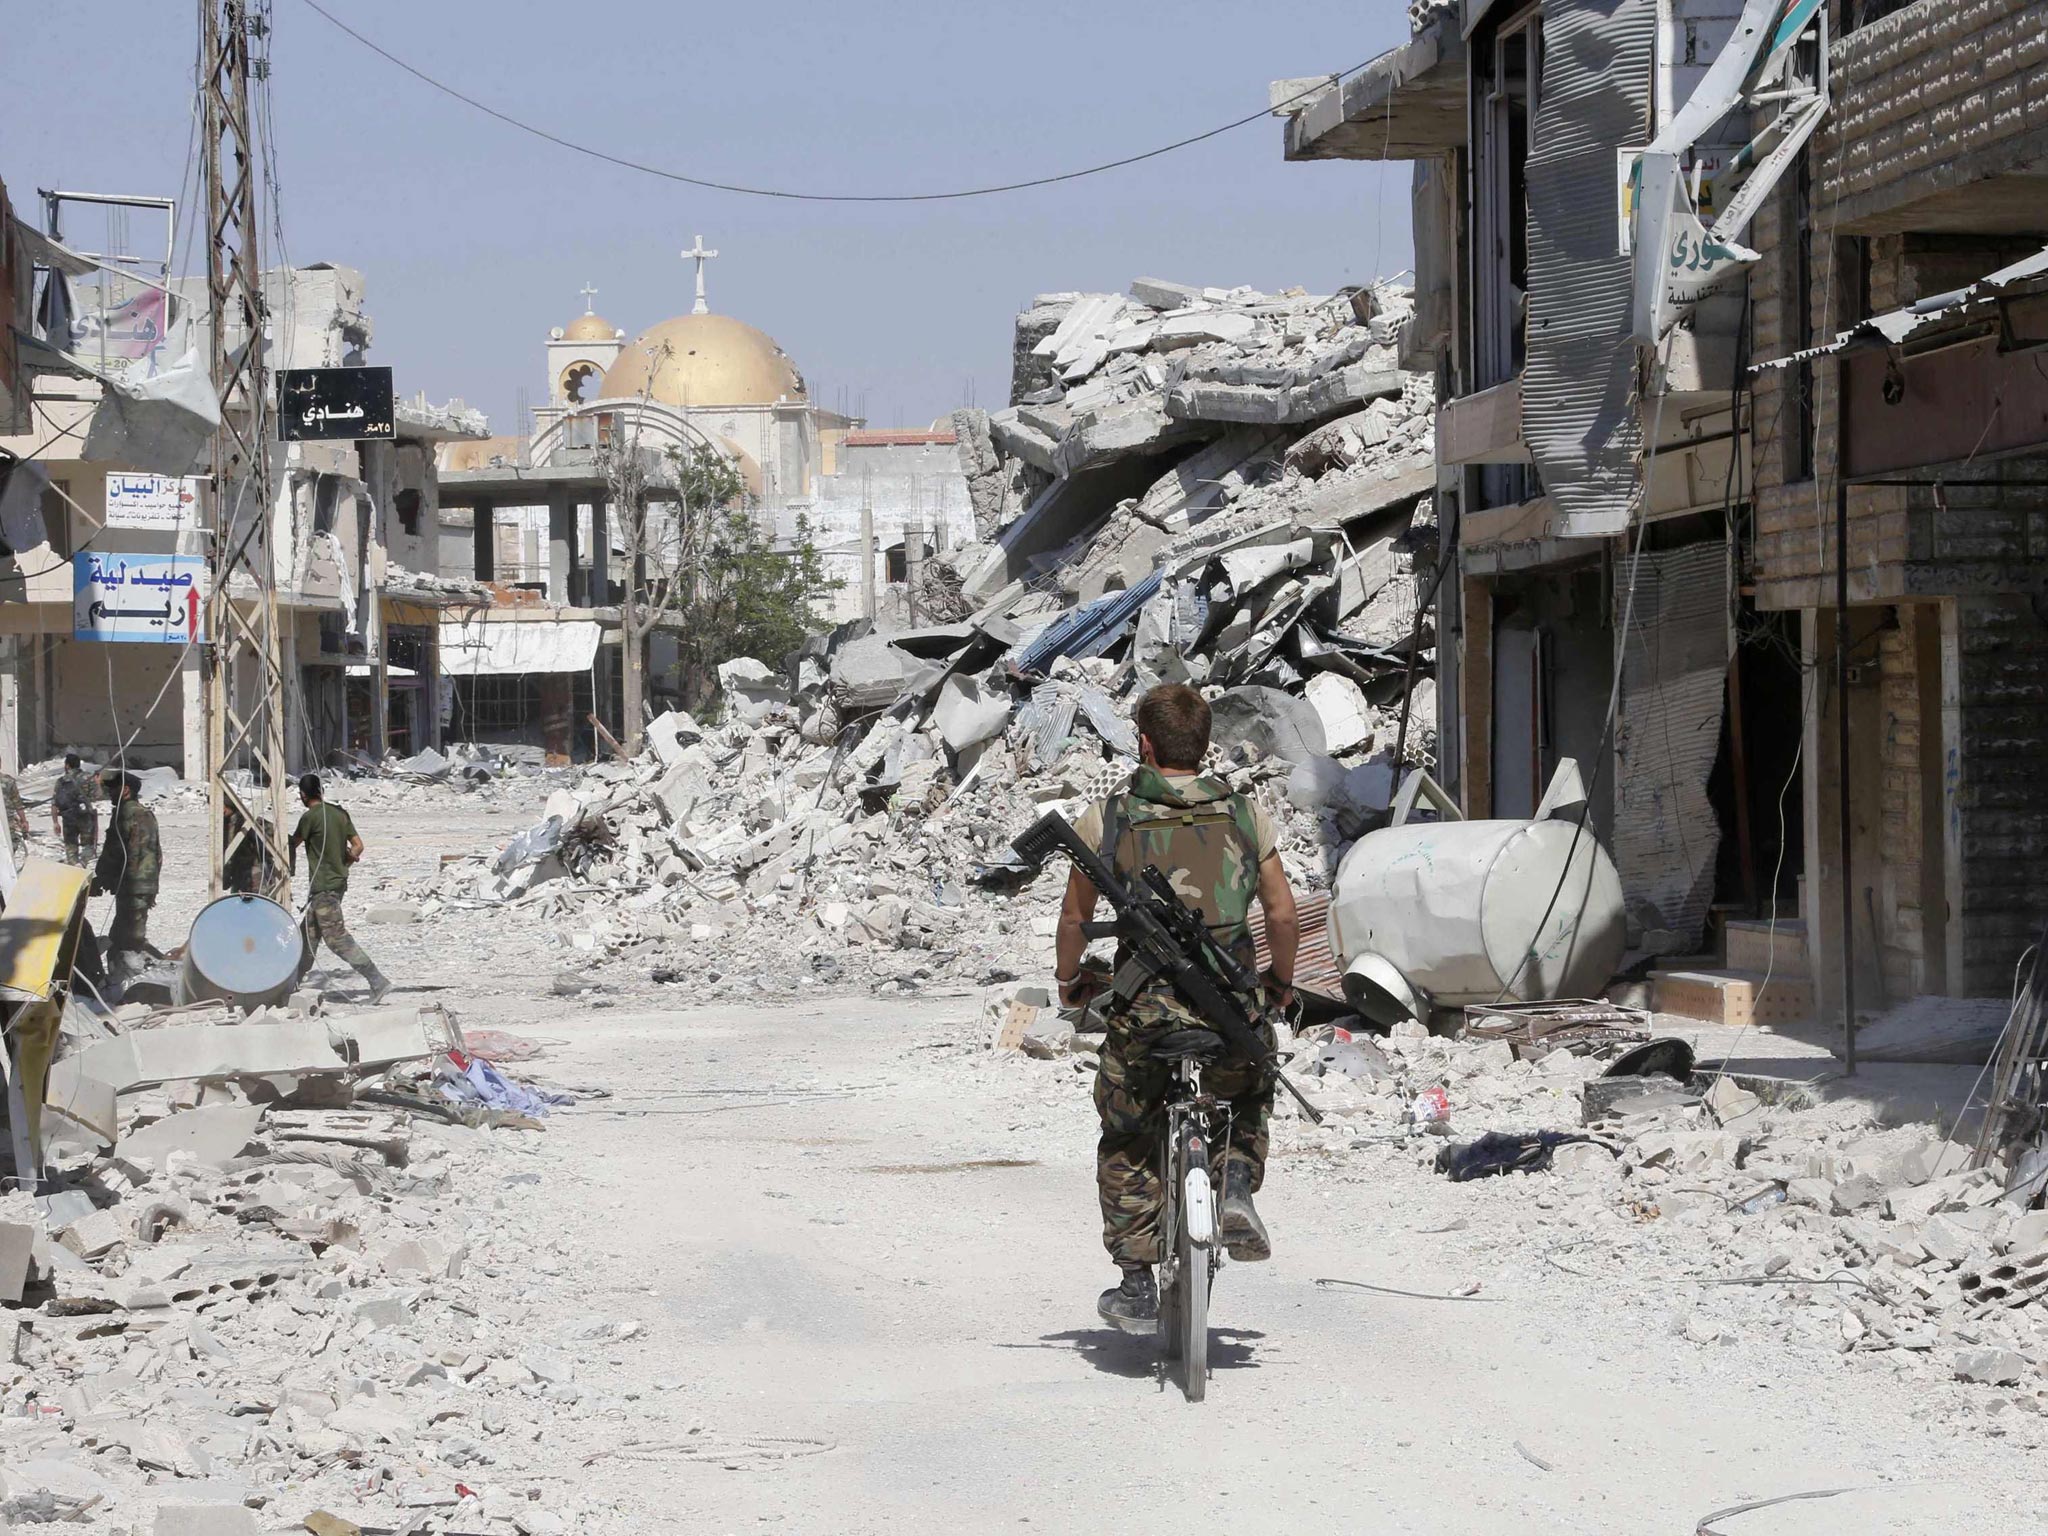 A member of the forces loyal to Syria's President Bashar al-Assad rides a bike along a street piled with damaged buildings in Qusayr, after the Syrian army took control of the city from rebel fighters